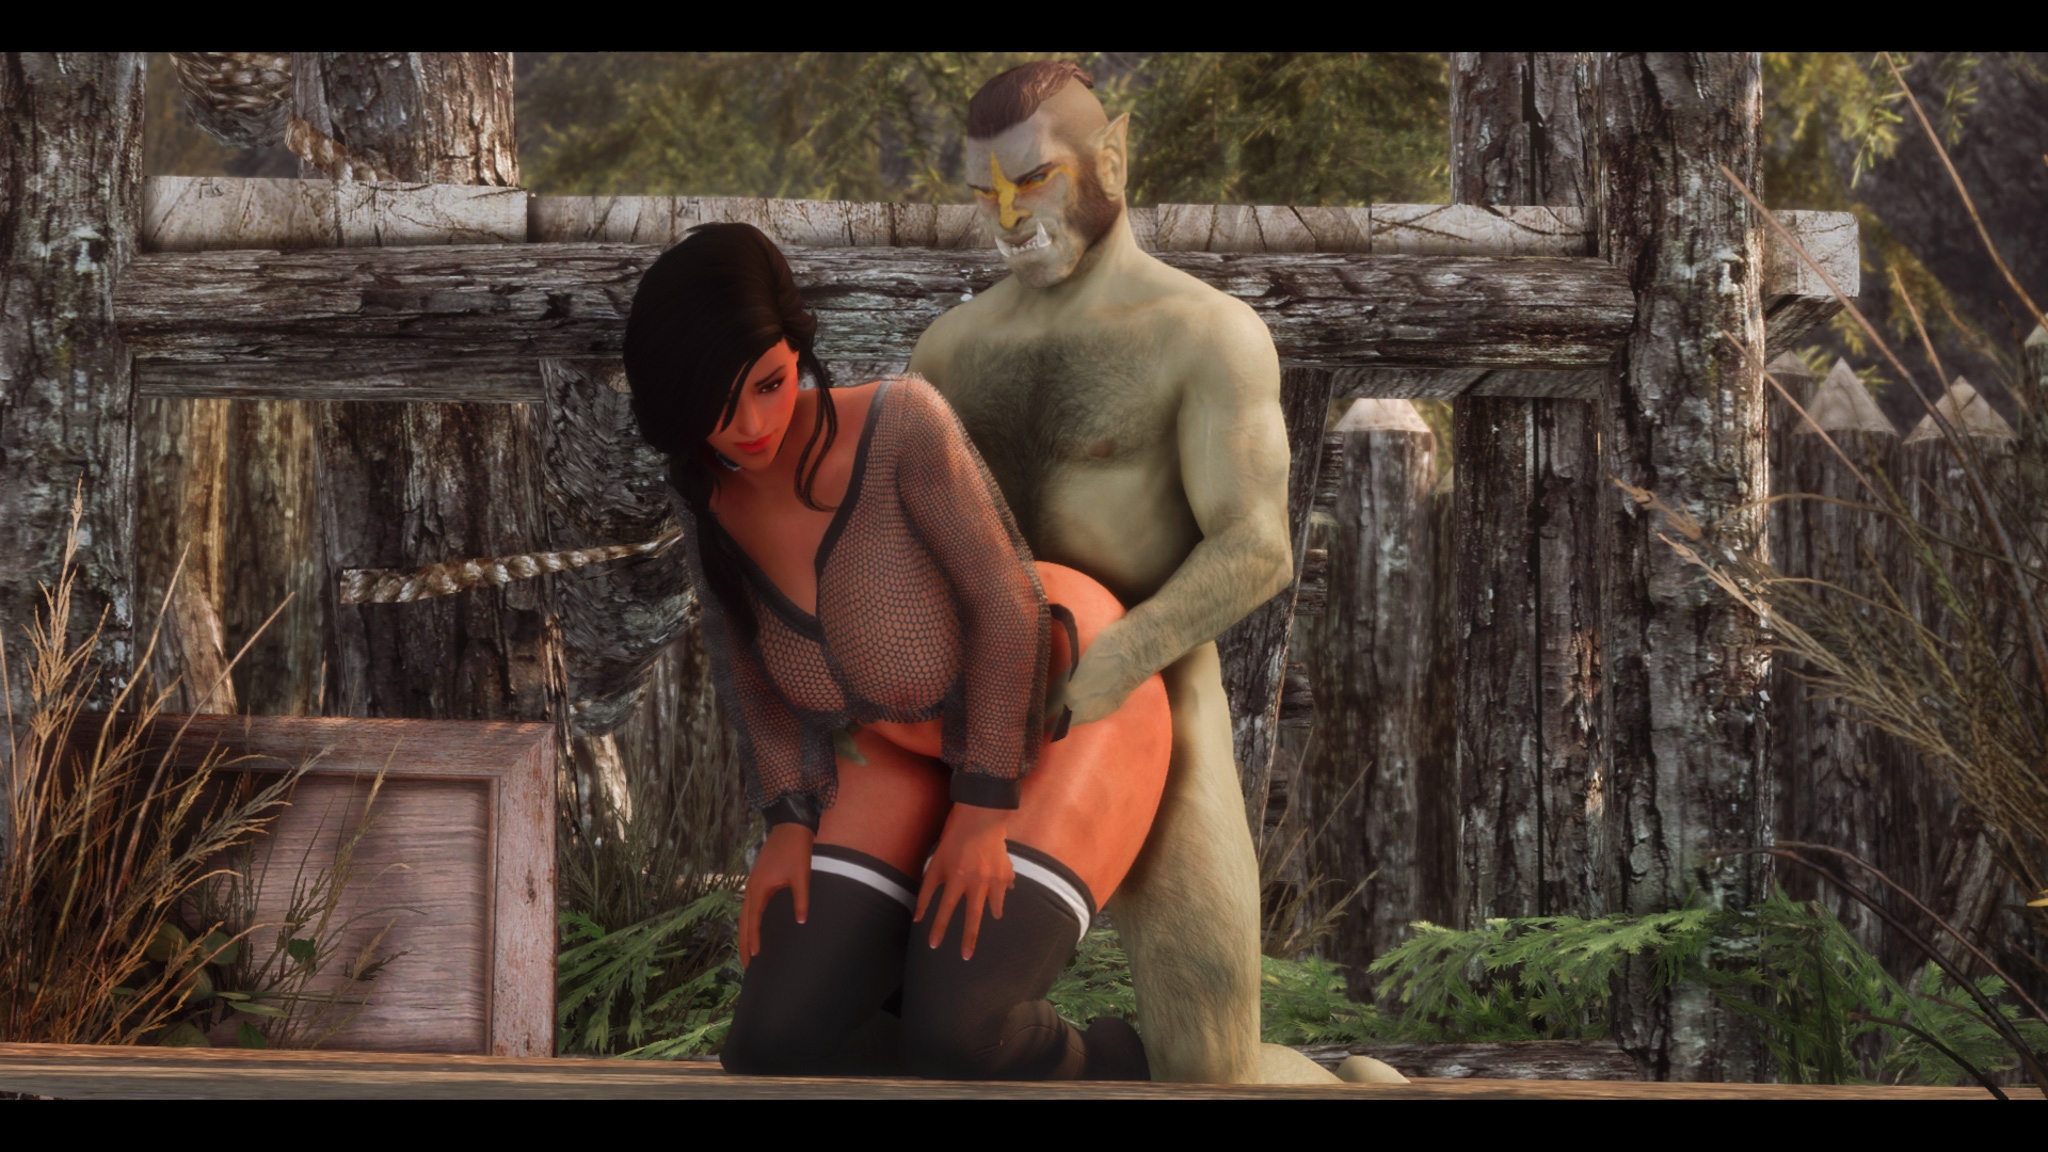 Orc Plows Redguard Skyrim Nsfw Babe Big Tits Tits Bdsm Roleplay Sexy 3d Porn Prostitute Bouncing Boobs Bouncing Tits Pussy Penetration Doggy Style Doggystyle Doggy Style Position Orc